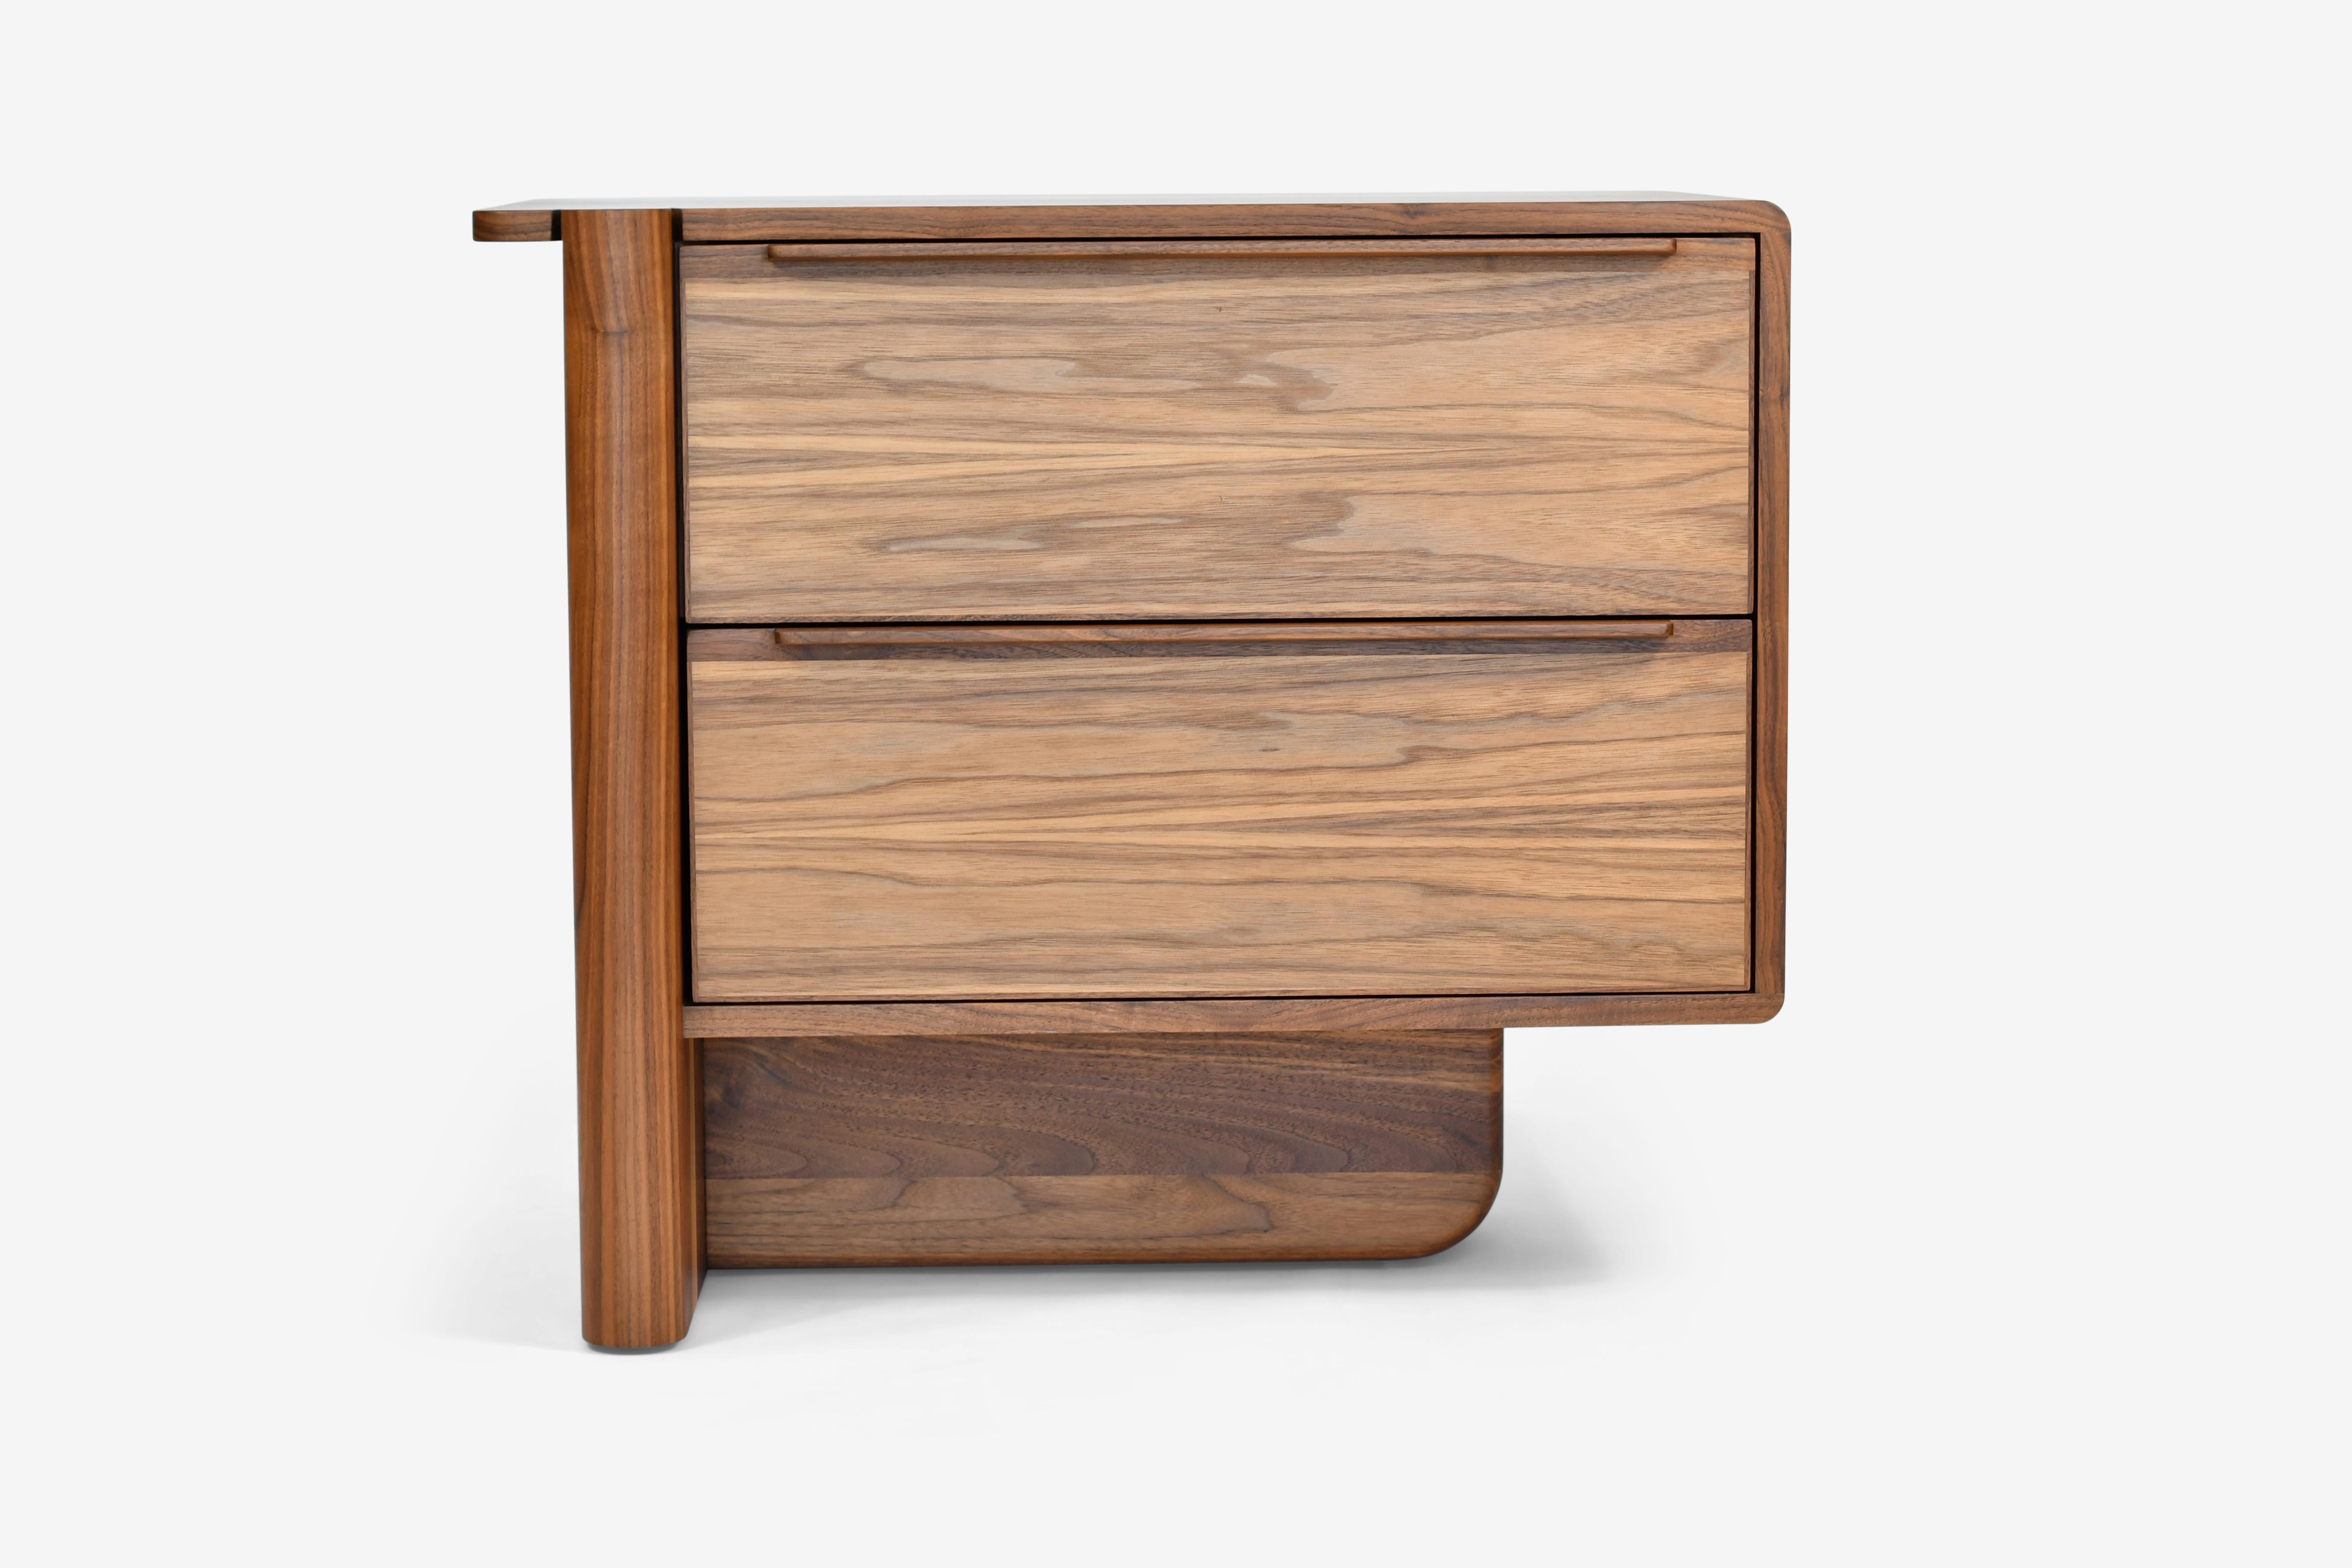 The Sulaco two drawer side table features an elevated blend of clean lines with its asymmetrical organic form all while providing a tailored look that still manages a broad range of versatility. The addition of the second drawer provides for ample